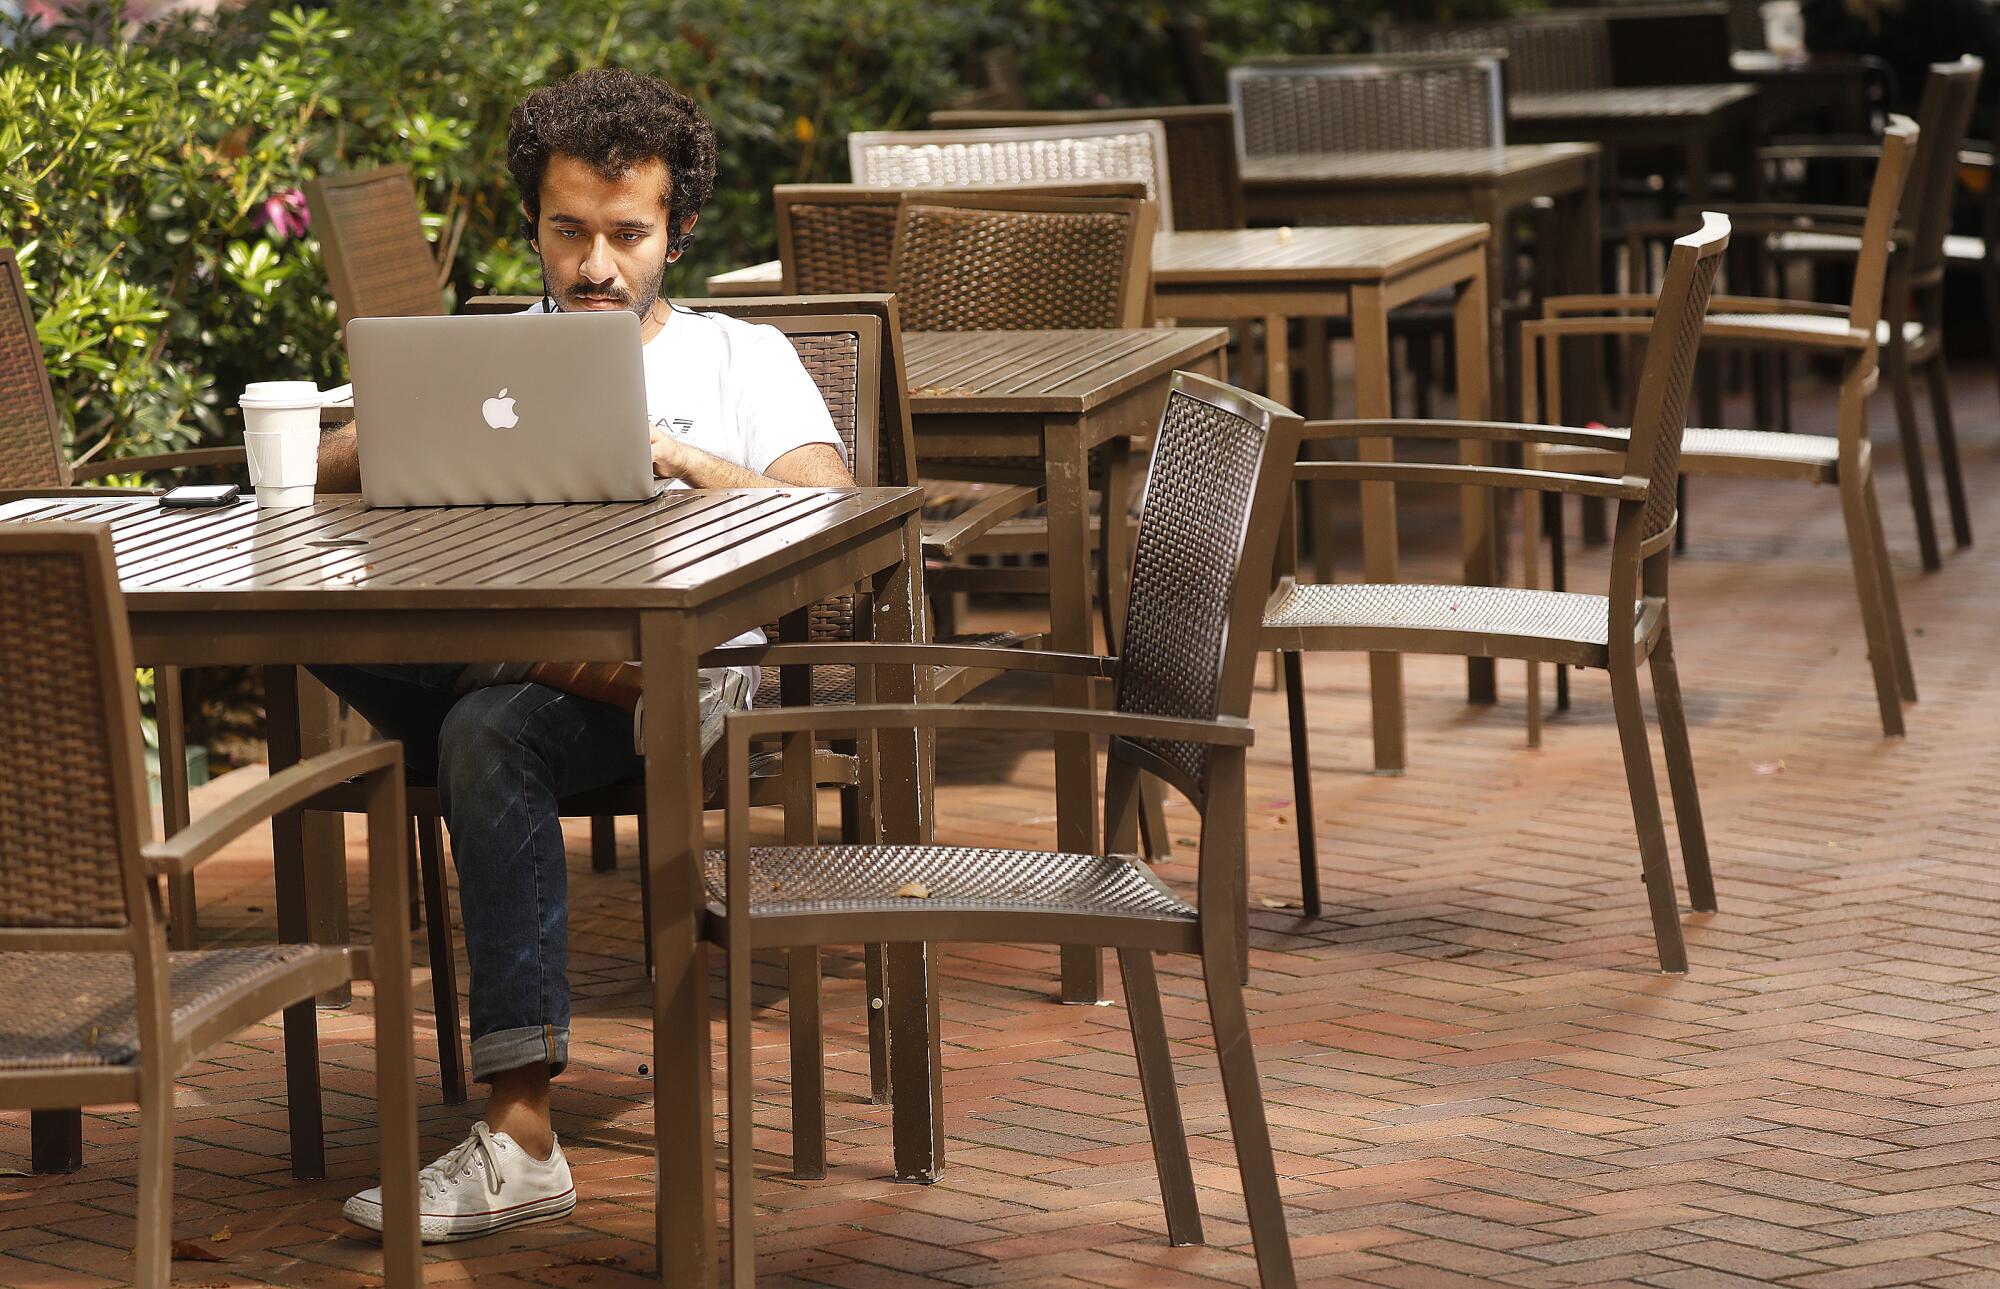 Fares Maimani, a Mechanical Engineering PhD student, came to the campus for some research work at USC campus, where classes are being held online.